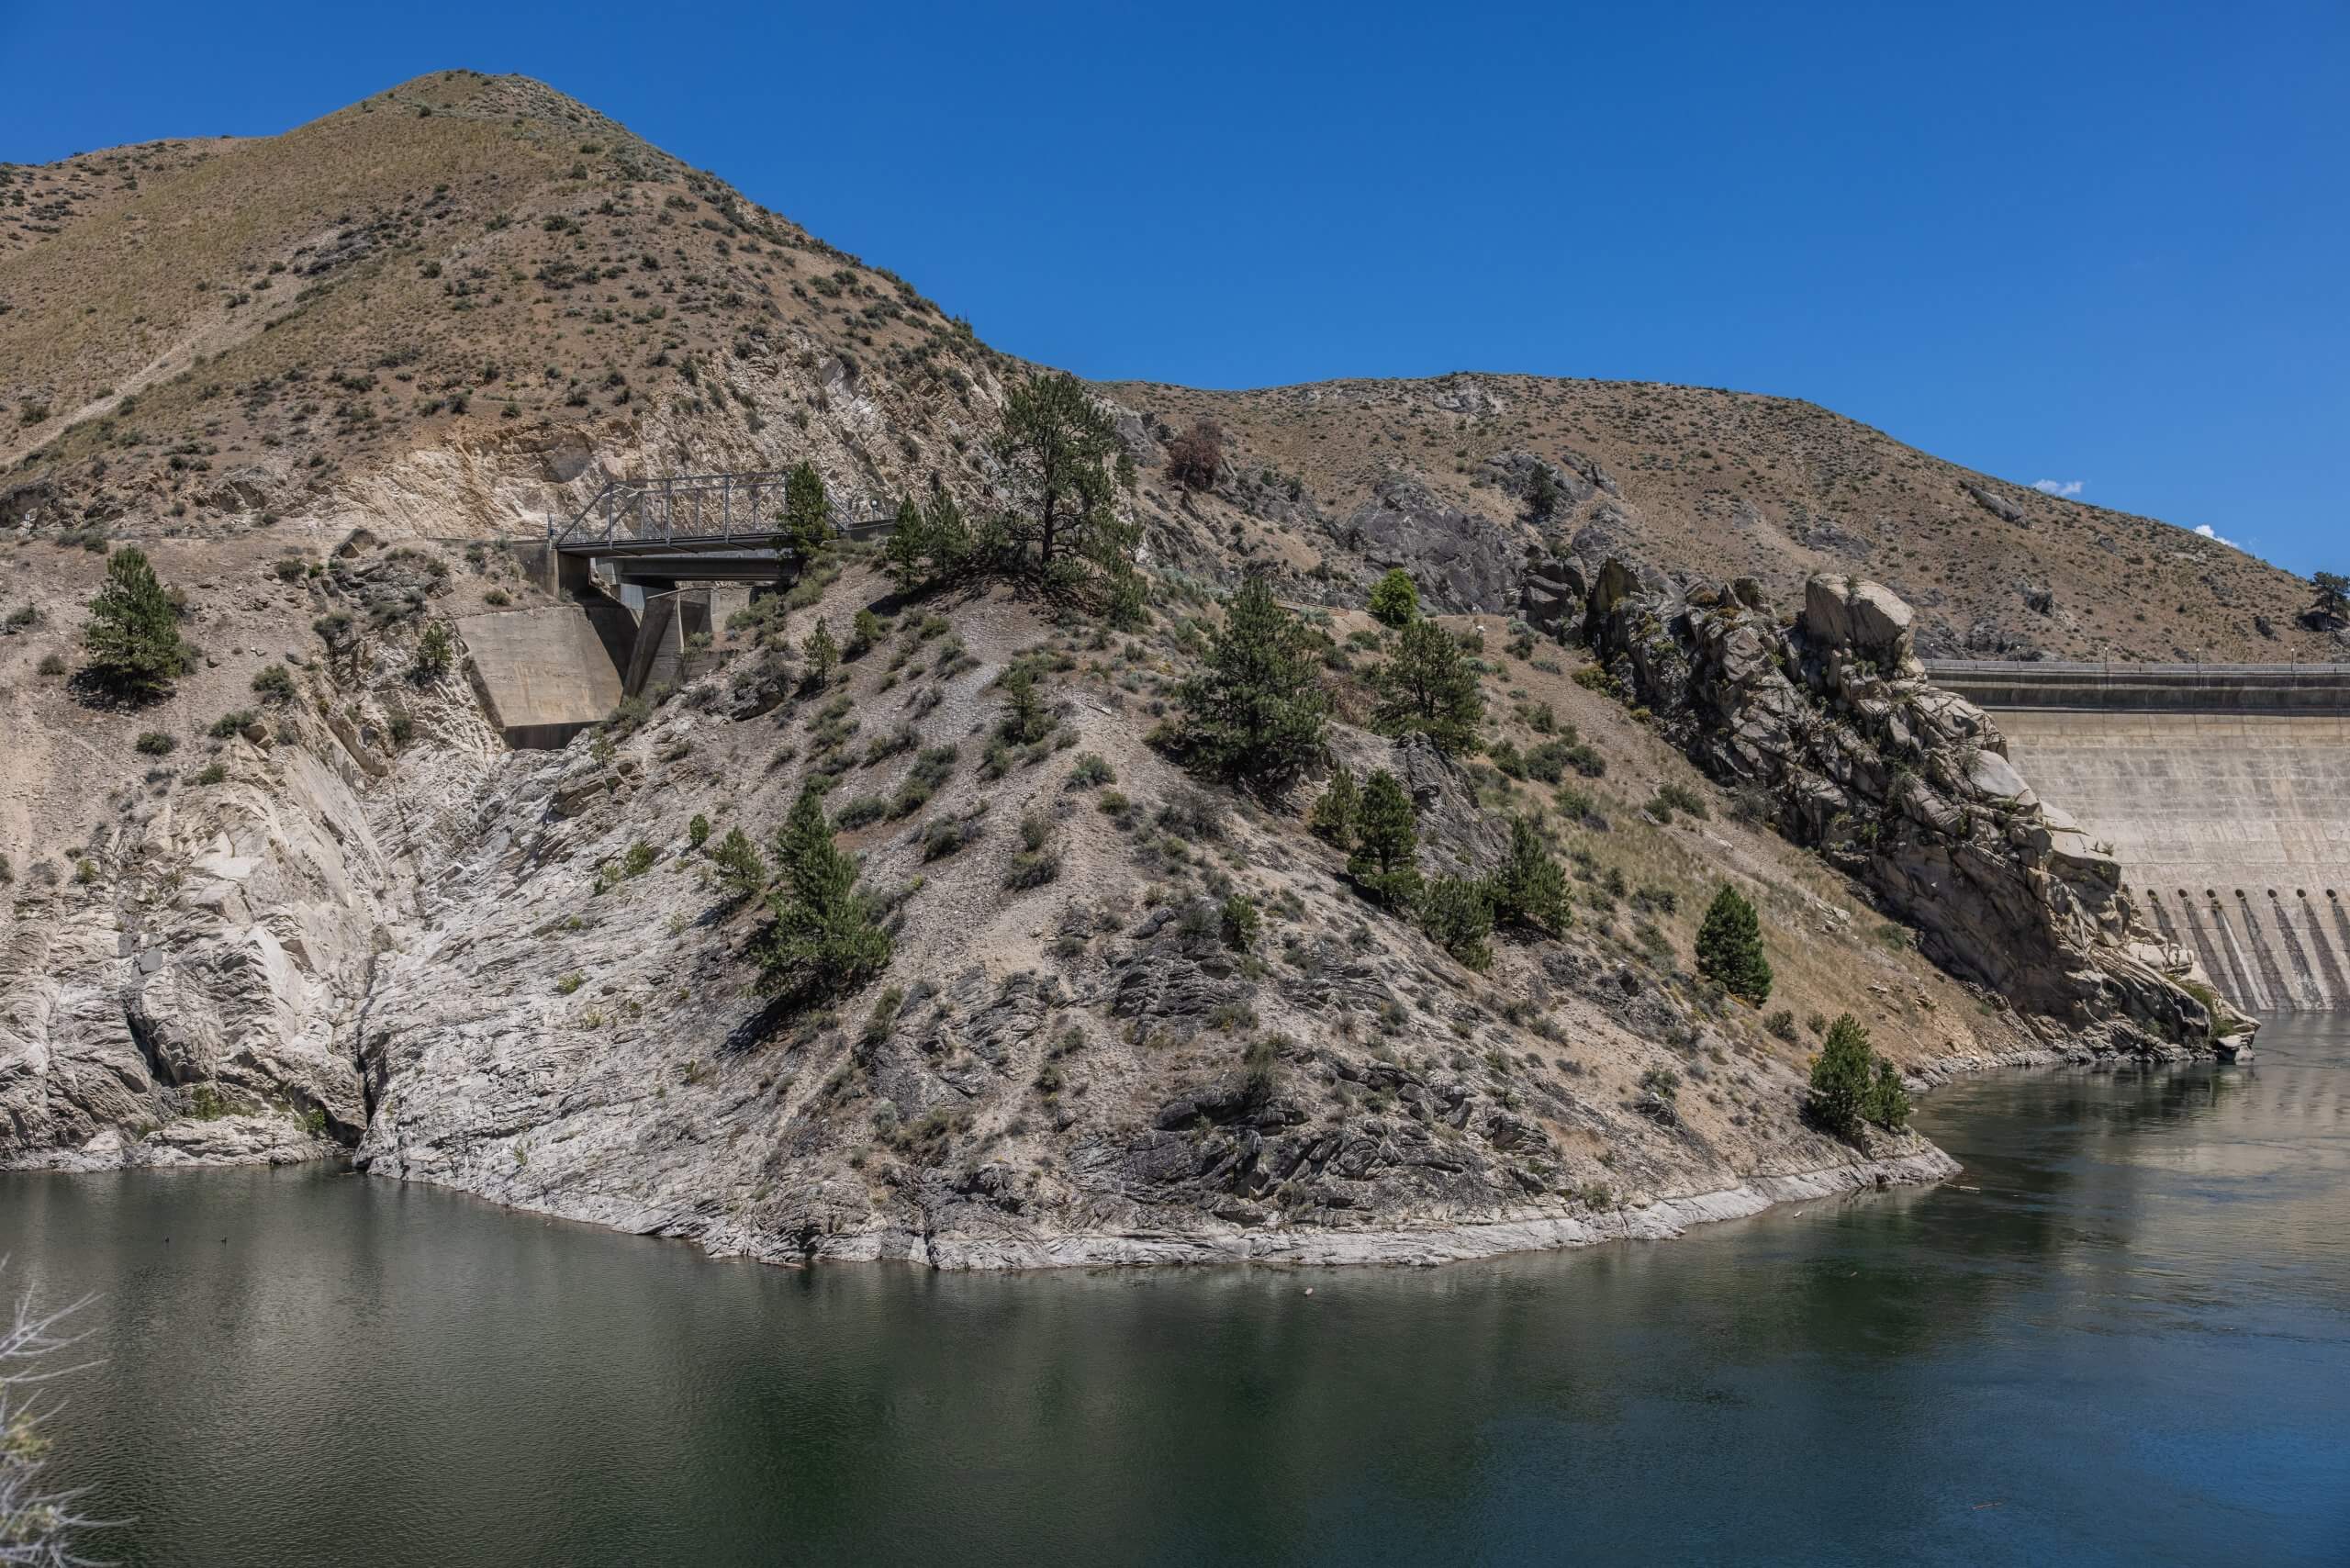 view of Arrowrock Dam and Reservoir, surrounded by mountains